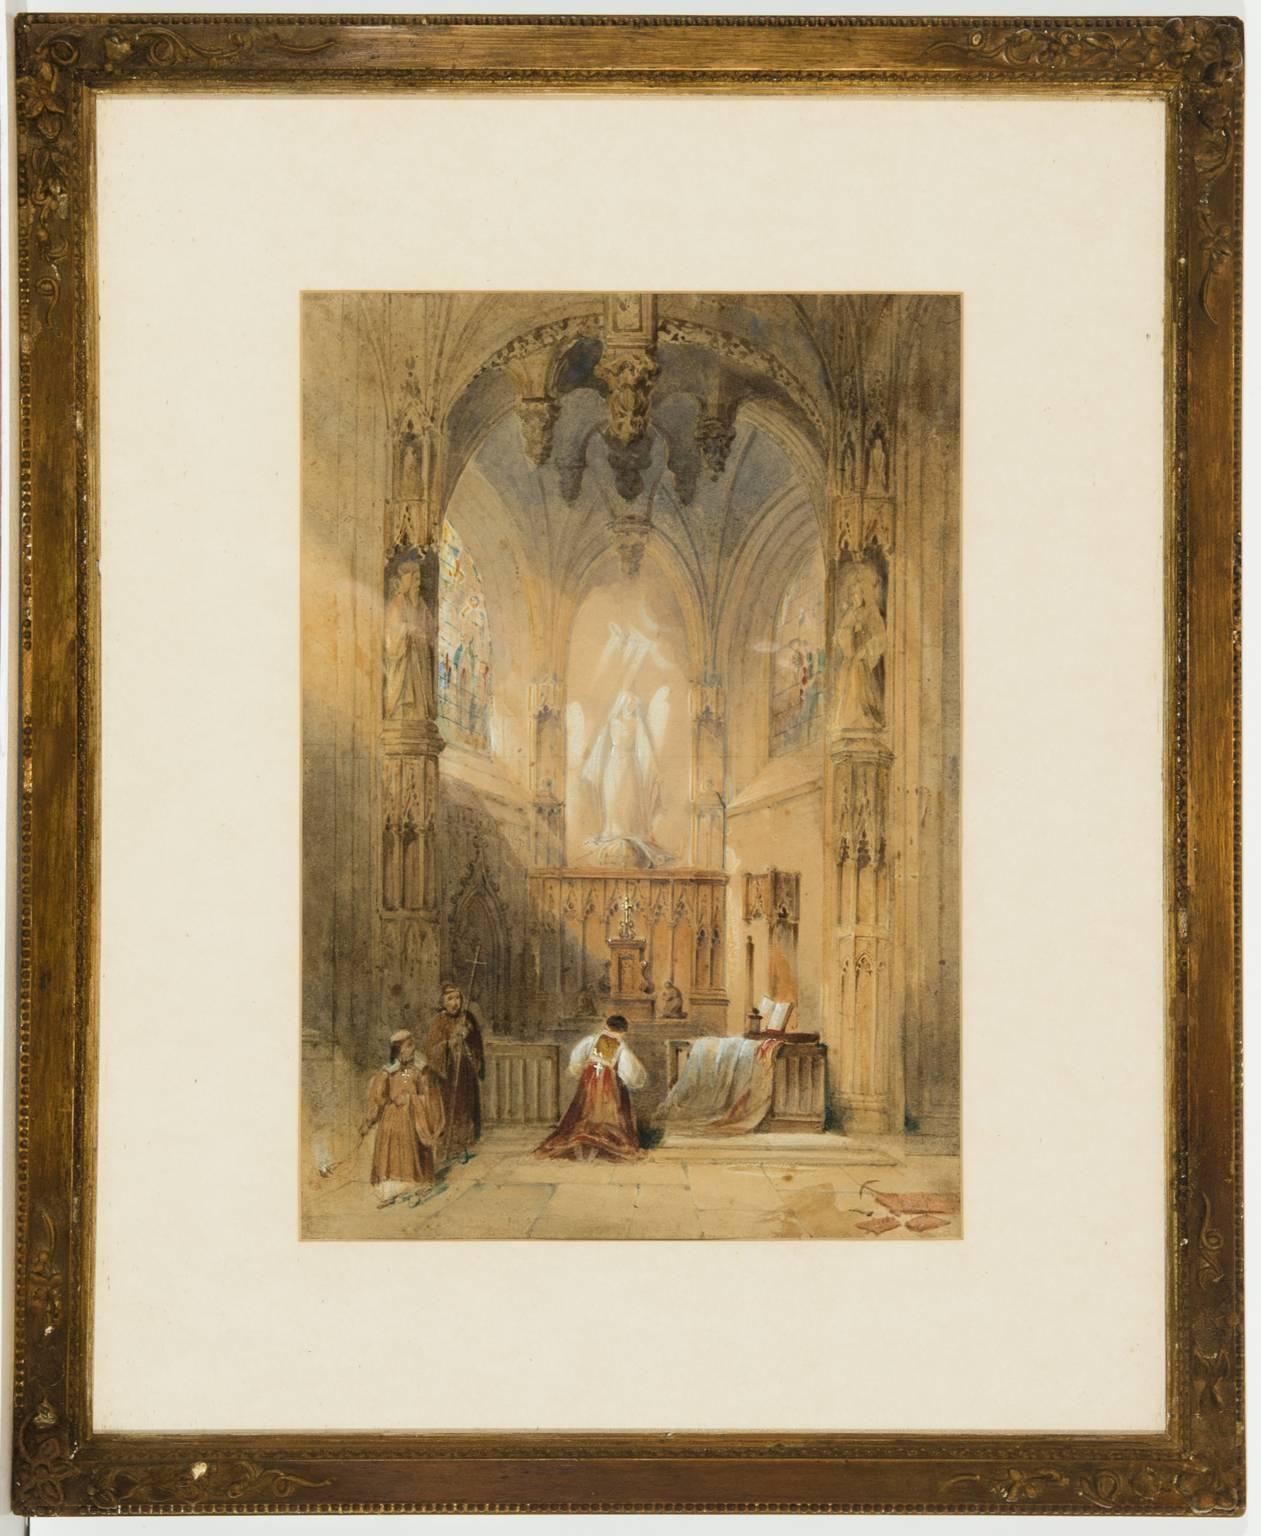 A very fine 19th century English watercolour in the manner of David Roberts RA, depicting a church interior with figures at prayer, beautifully presented in a decorative gilt frame. There is an indistinct signature and date to the lower right -